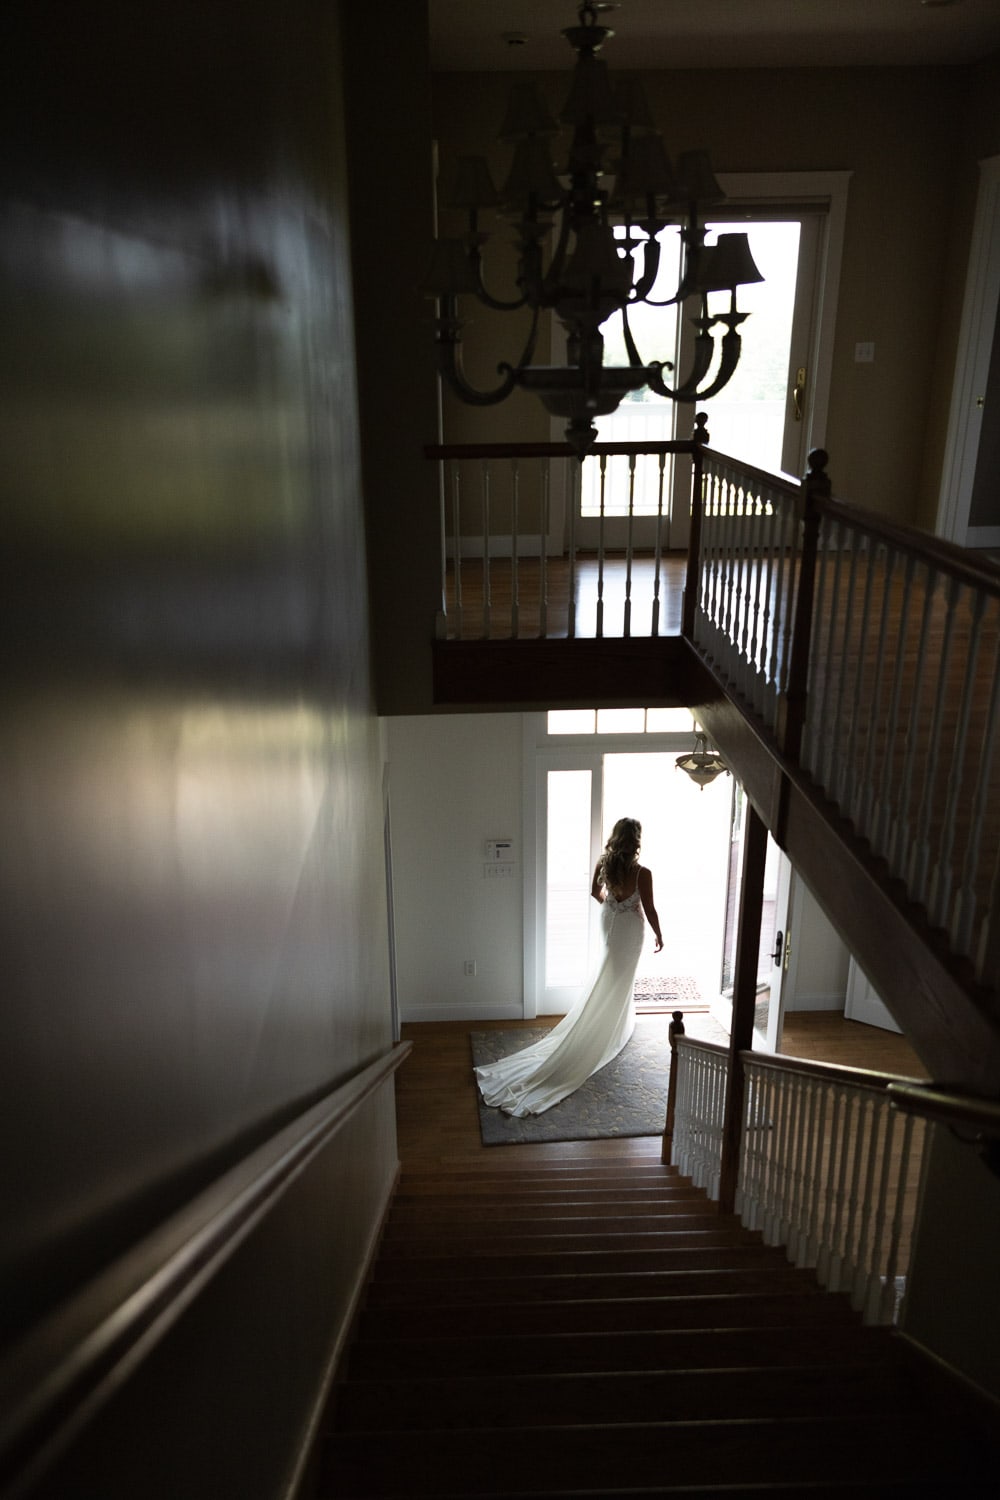 A bride in a long gown and veil descends a wooden staircase, viewed from the top of the stairs.